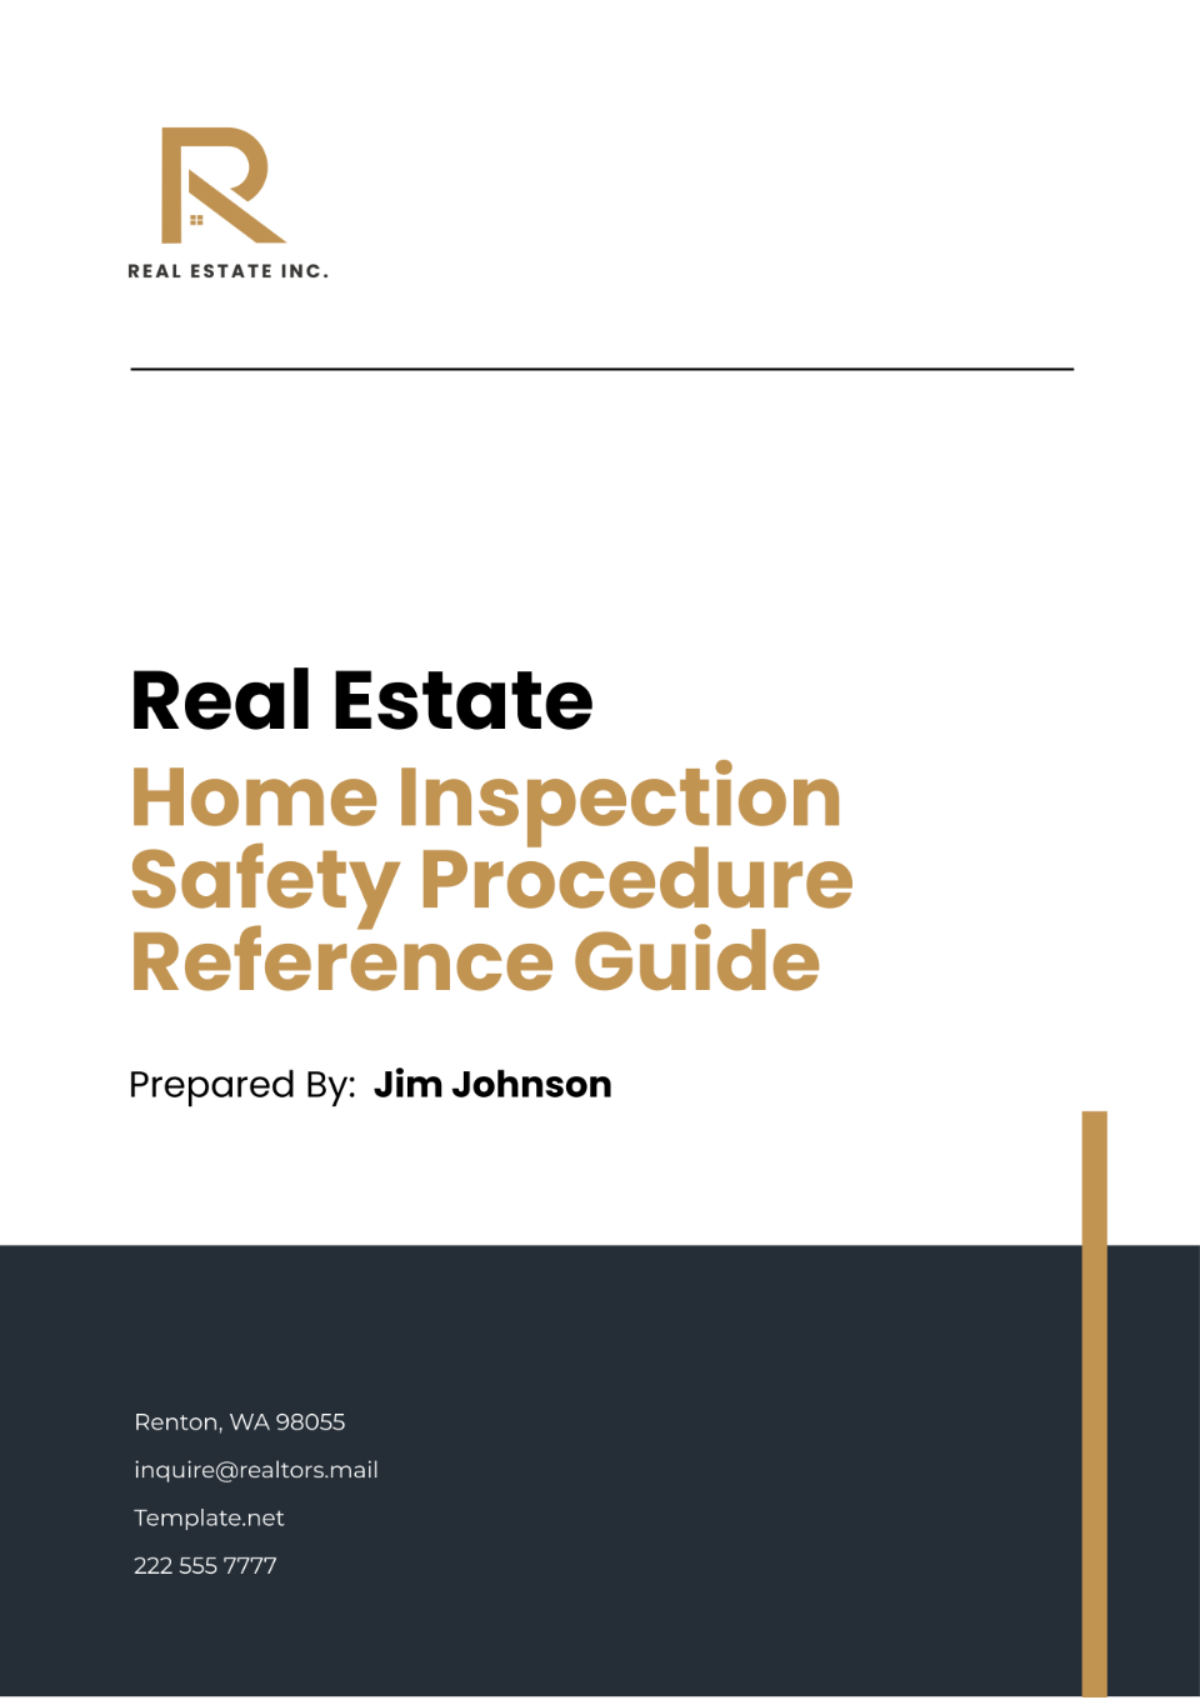 Real Estate Home Inspection Safety Procedure Reference Guide Template